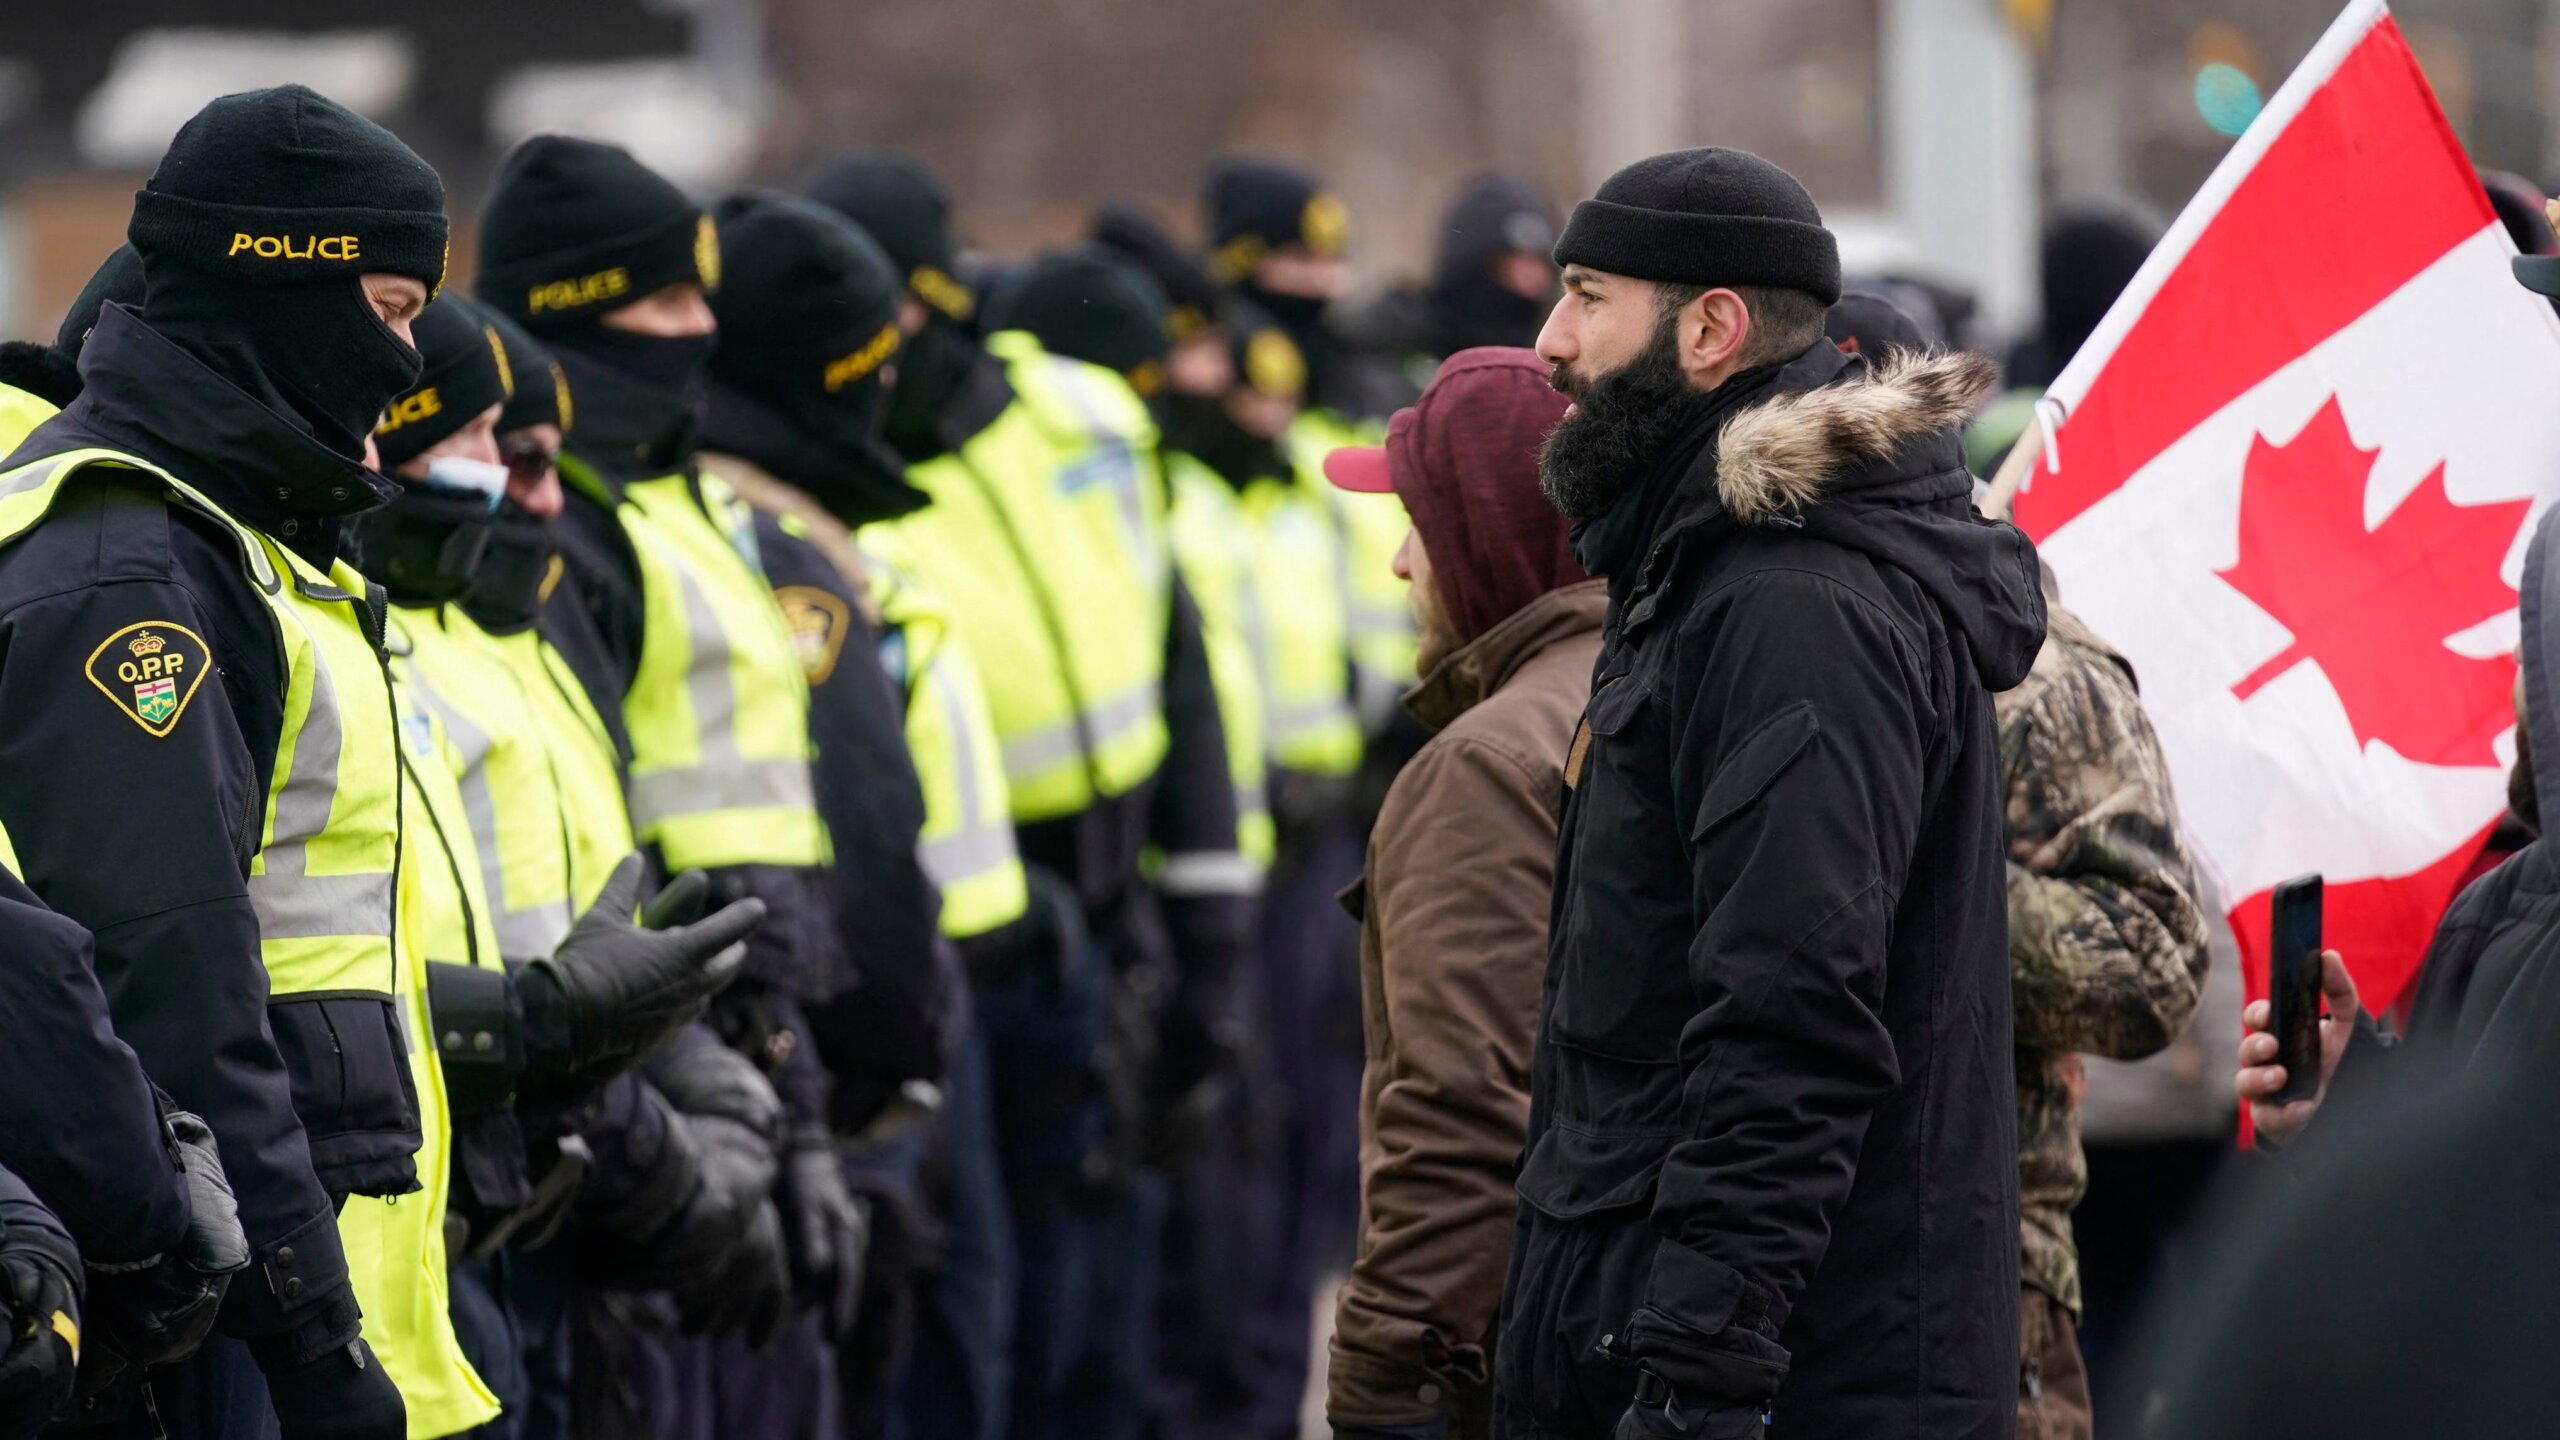 Canadian Police Clearing Protesters From Key Bridge Connecting Canada And U.S.